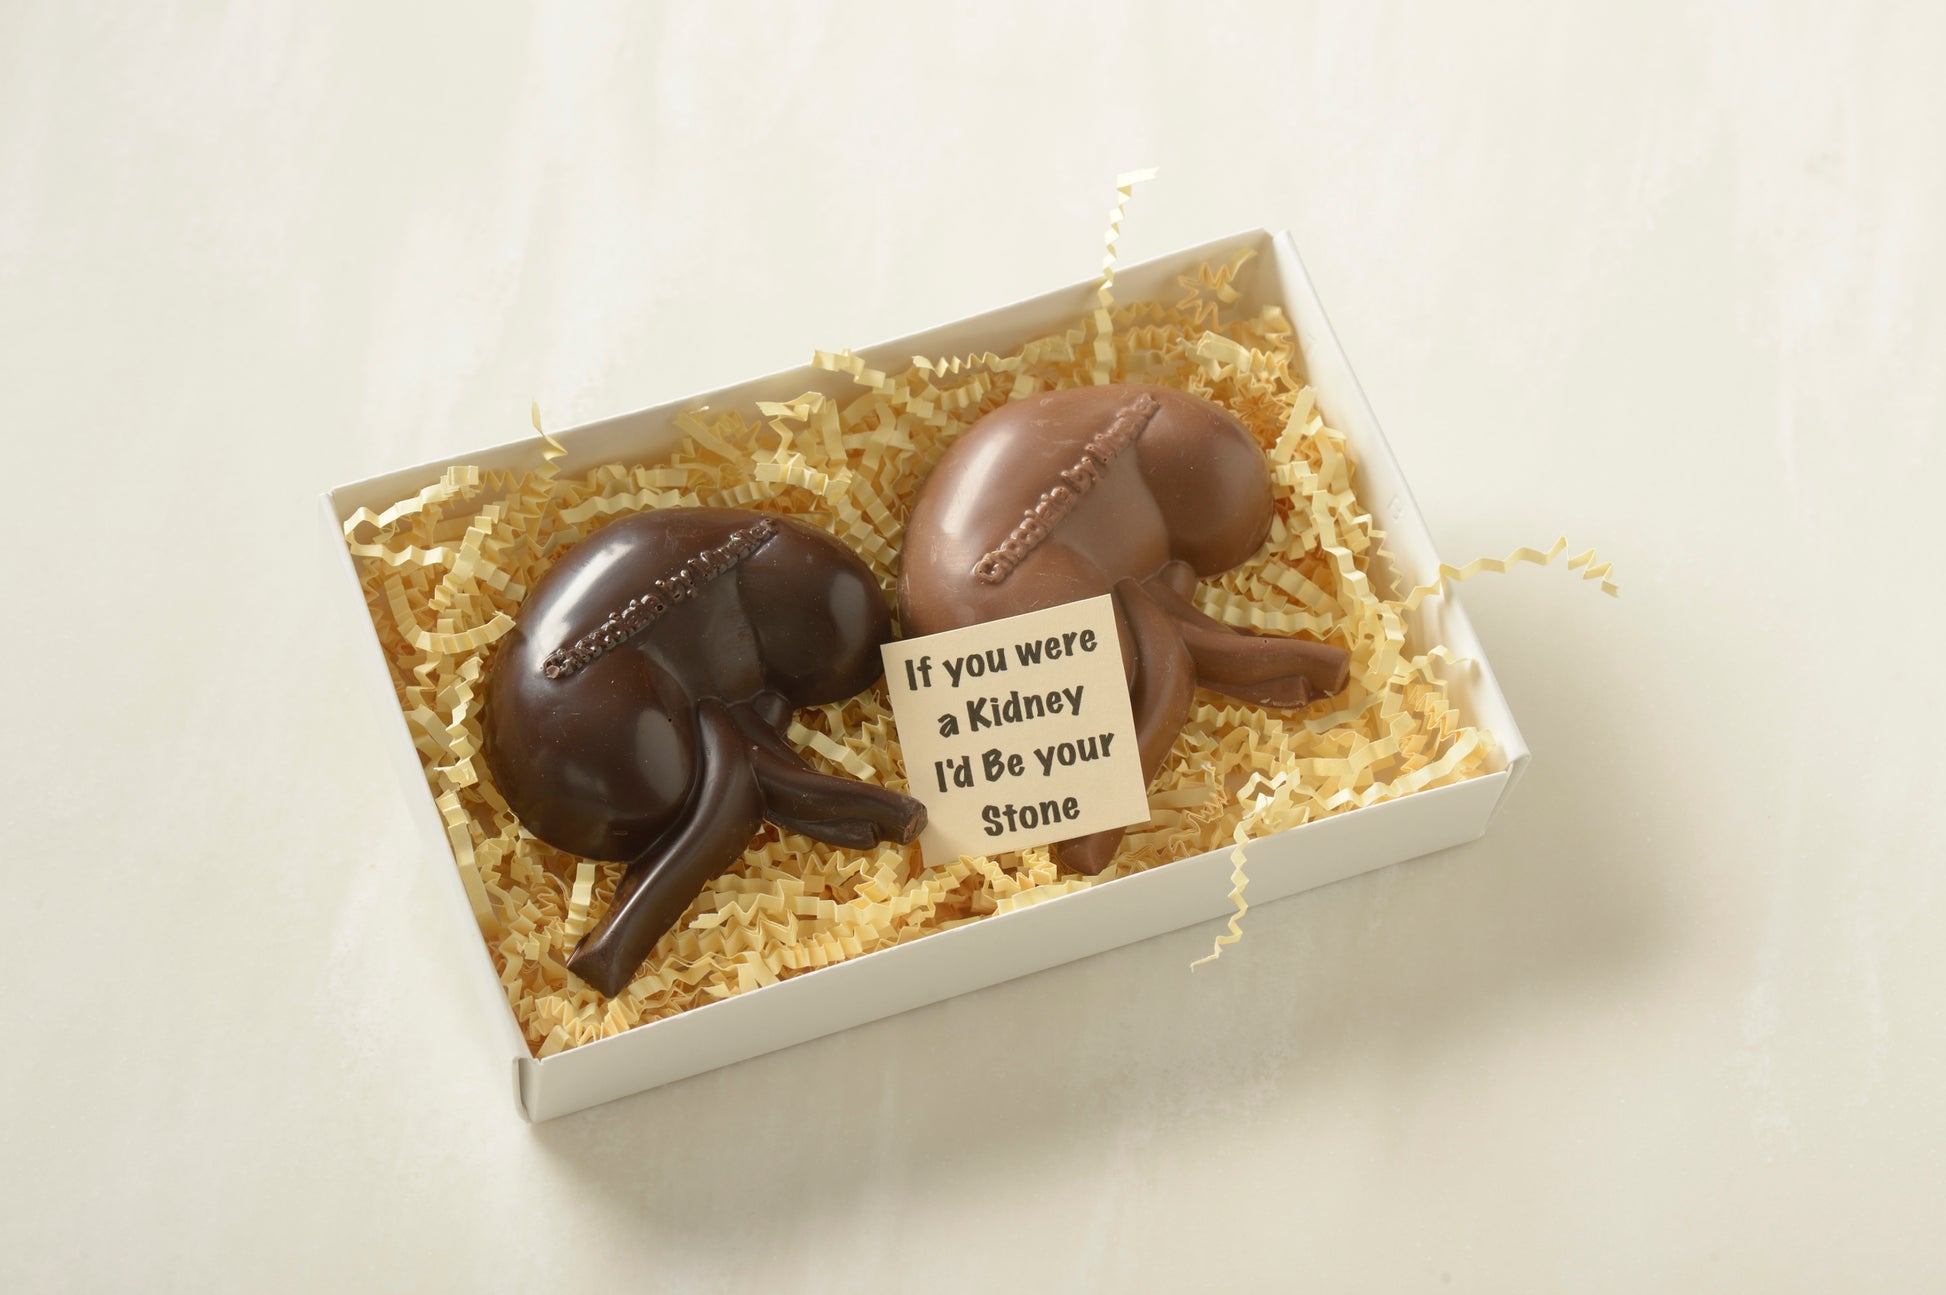 Anatomically correct chocolate kidneys: gourmet milk and dark chocolate molded into kidney shapes, perfect for medical professionals and anatomy enthusiasts.